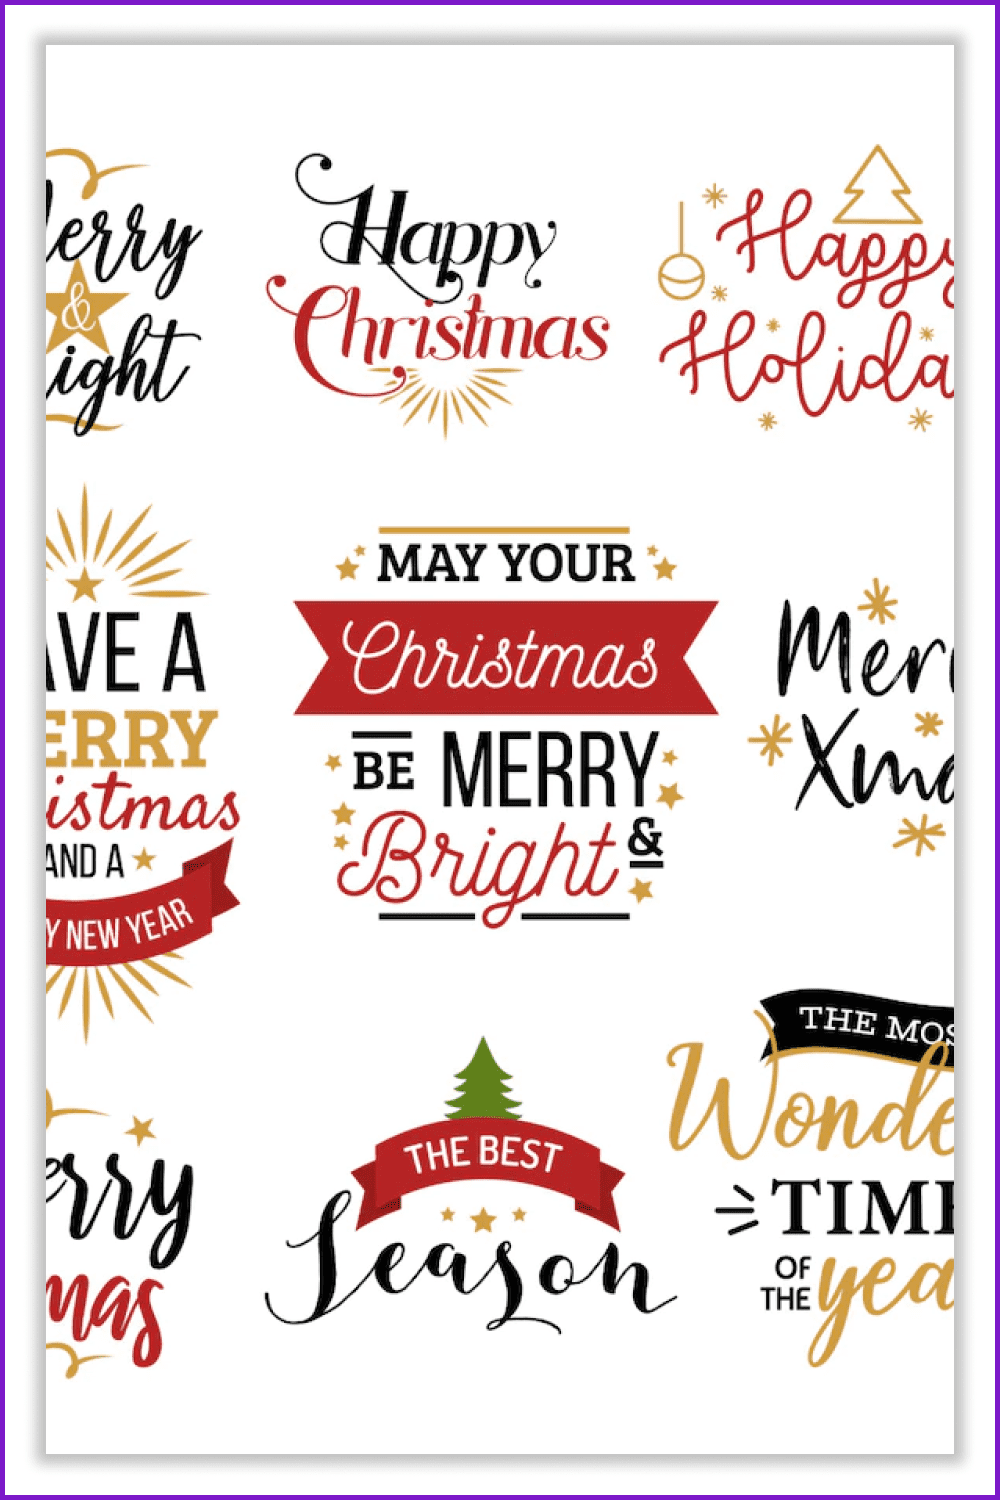 Collage of pictures with wishes for Christmas.